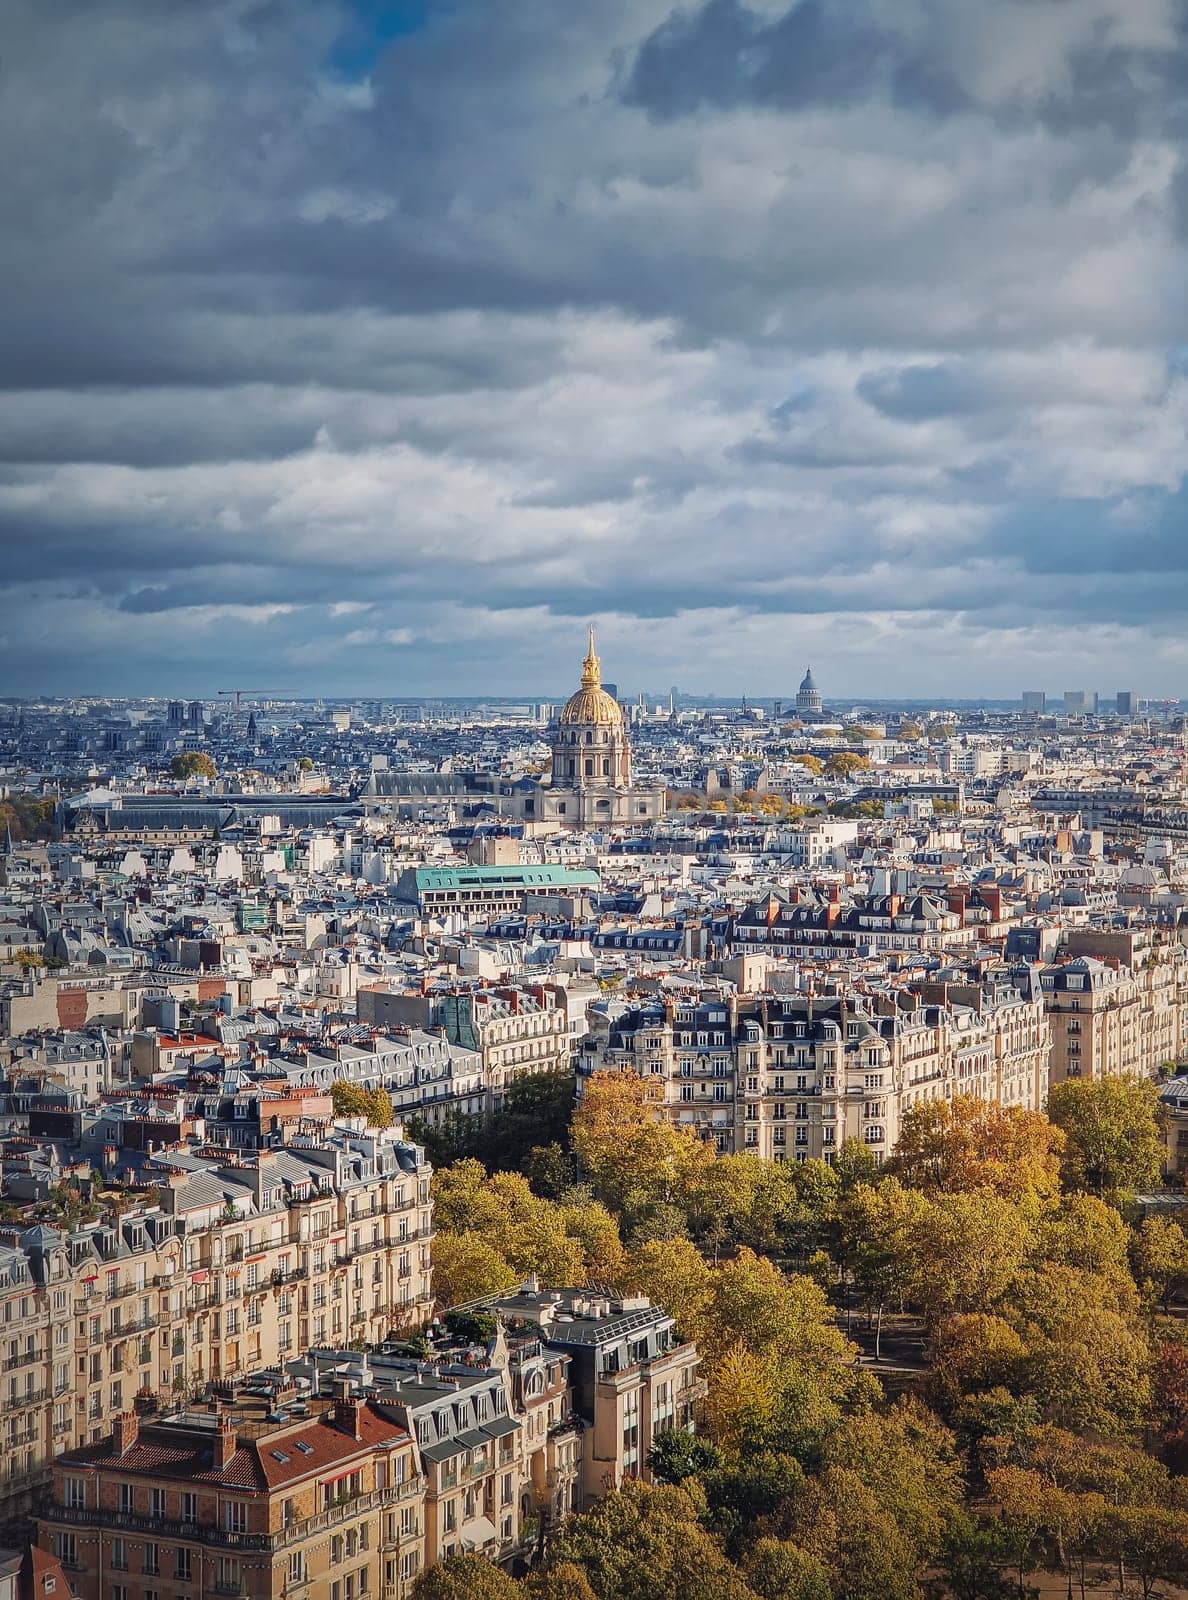 Scenery aerial view from the Eiffel tower height over the Paris city, France. Les Invalides building with golden dome seen on the horizon. Autumn parisian cityscape by psychoshadow